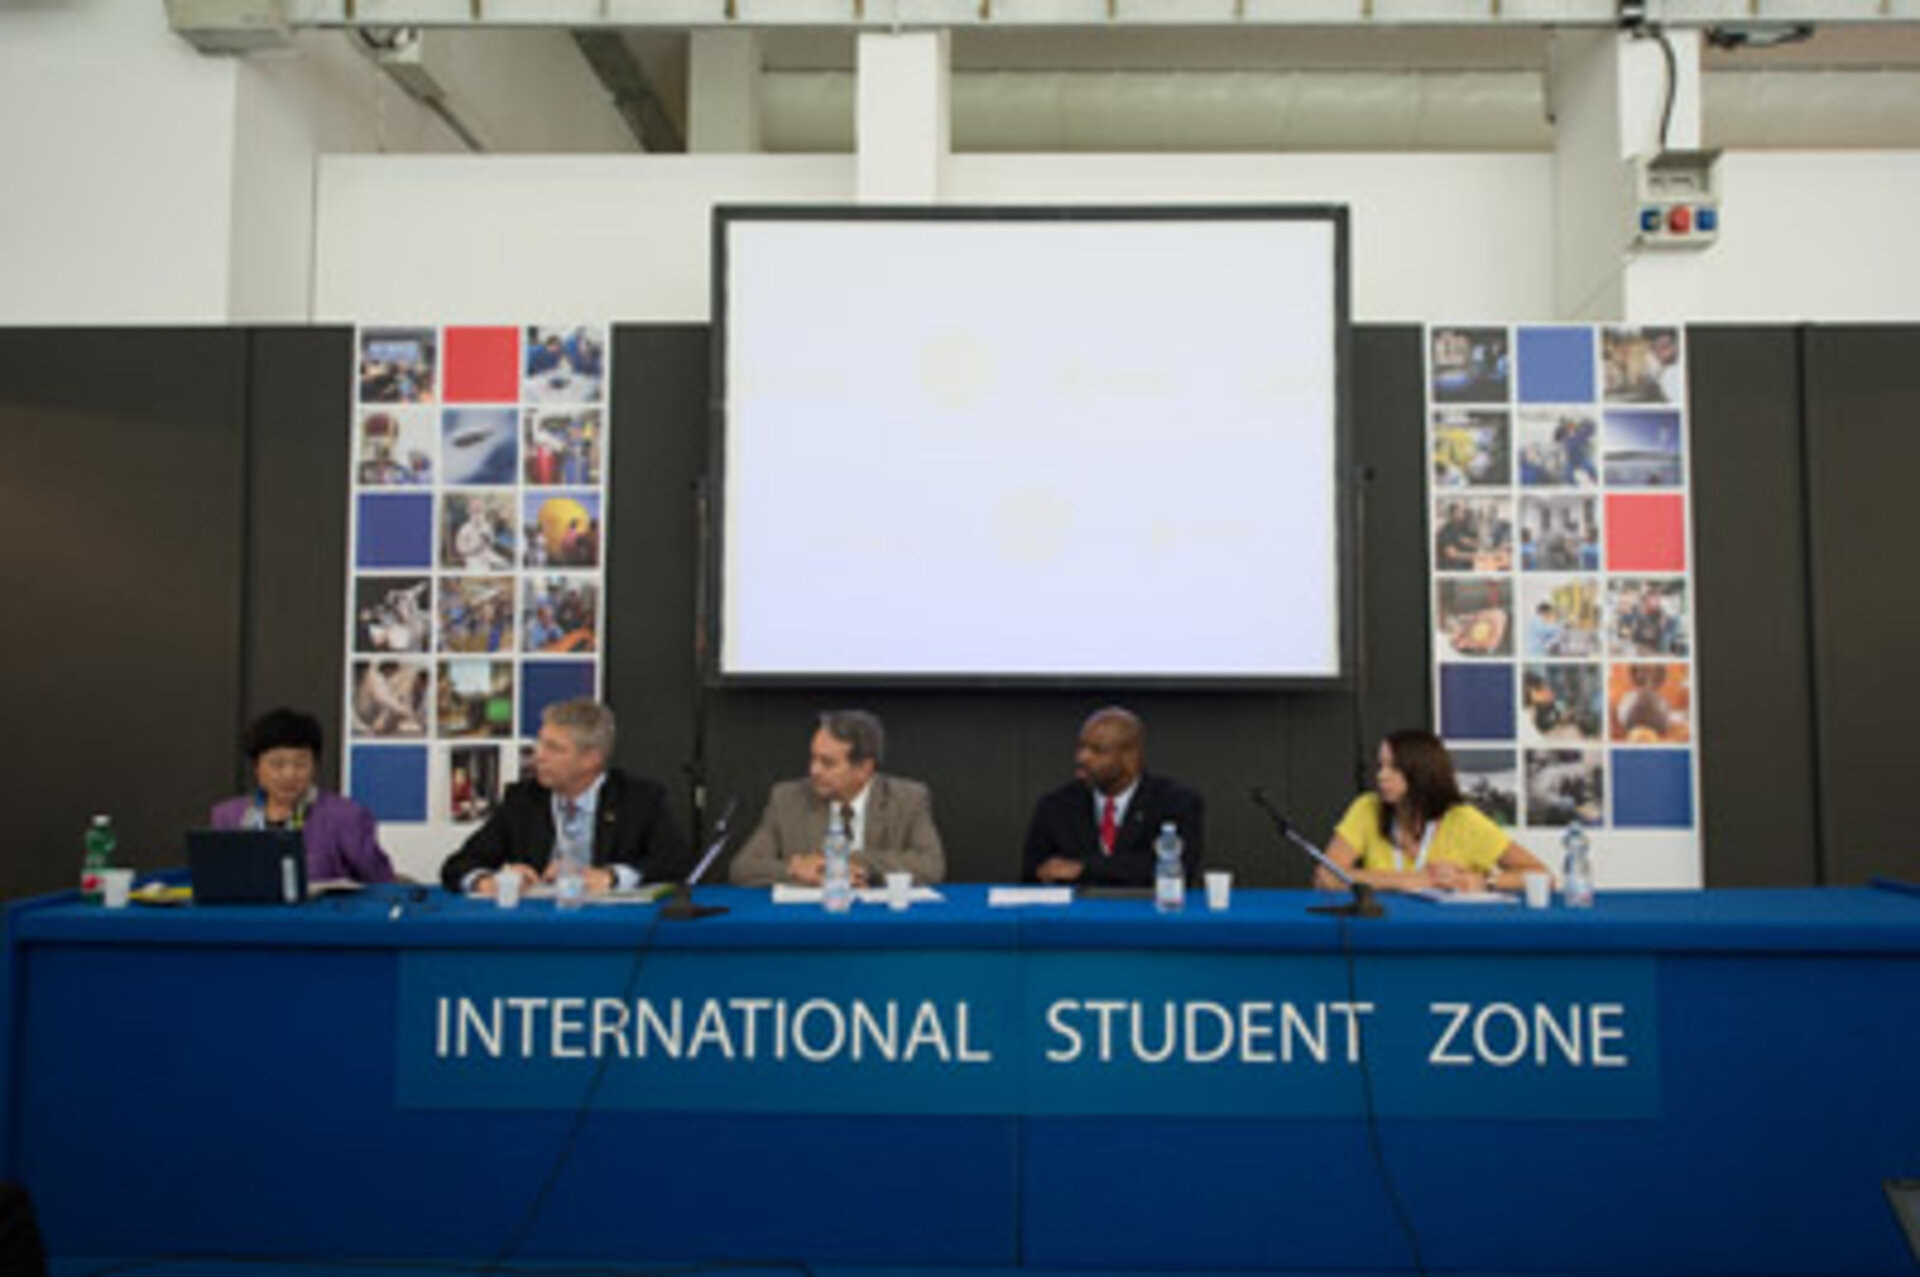 Panel session for students on human exploration of space